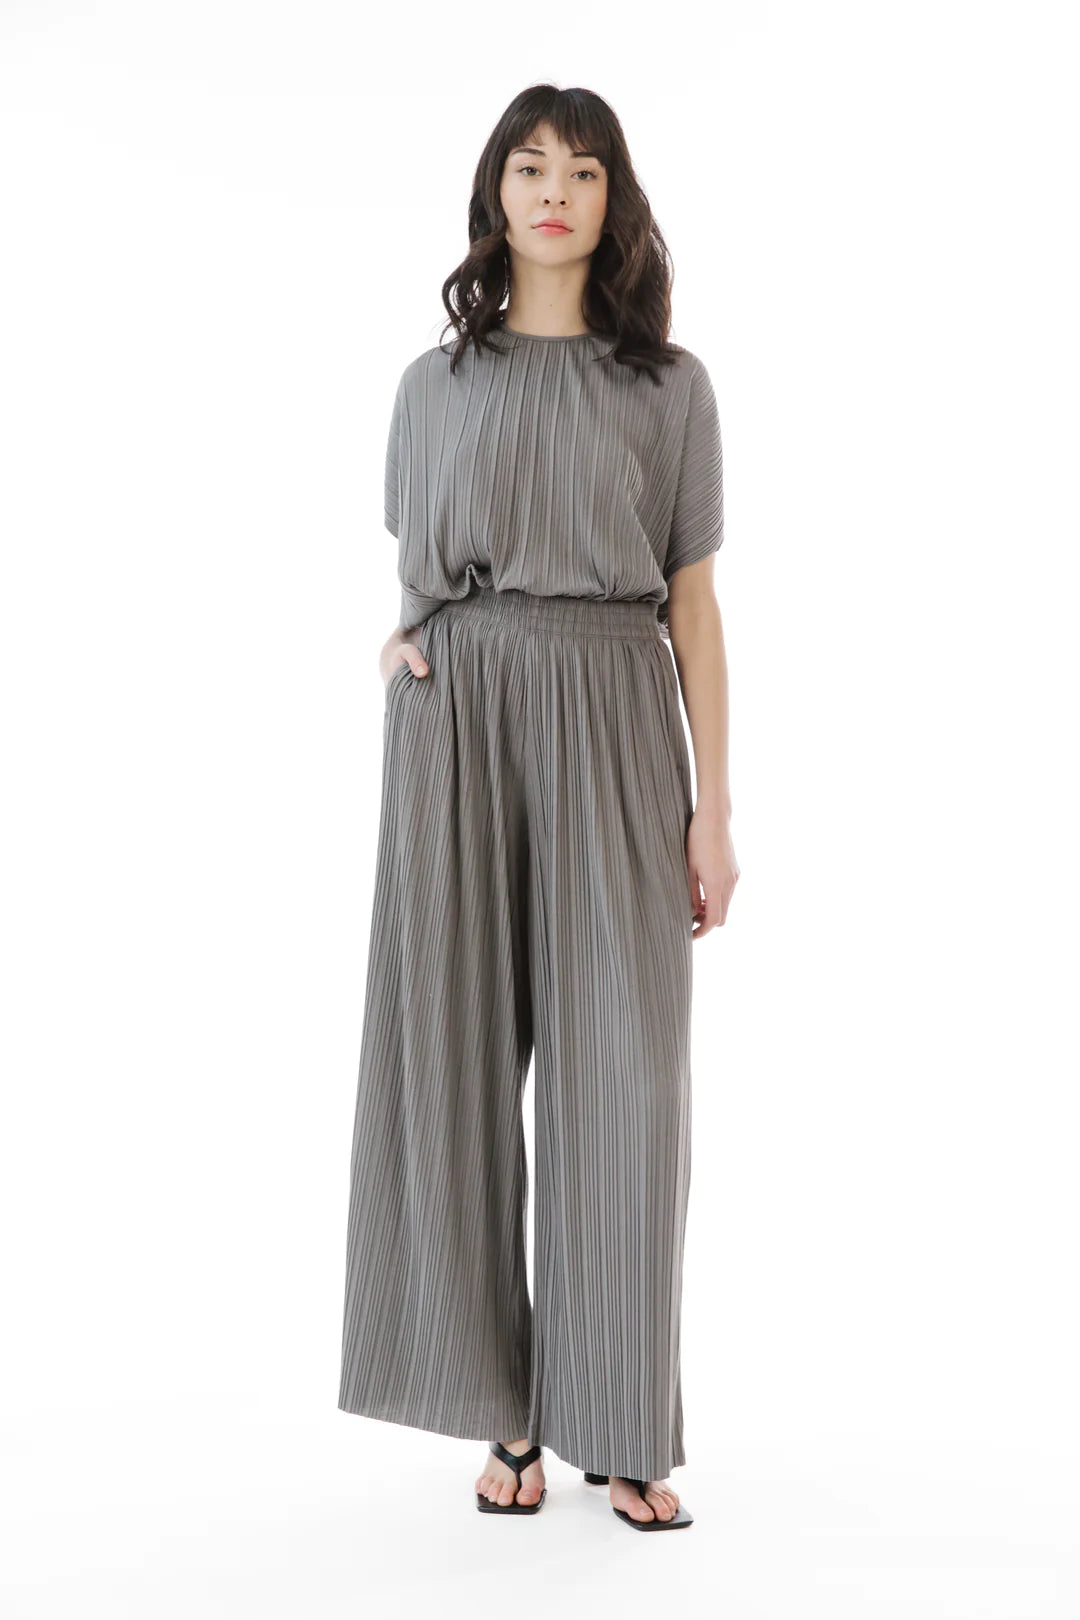 Oliver Pleated Wide Leg Pant - Charcoal Grey